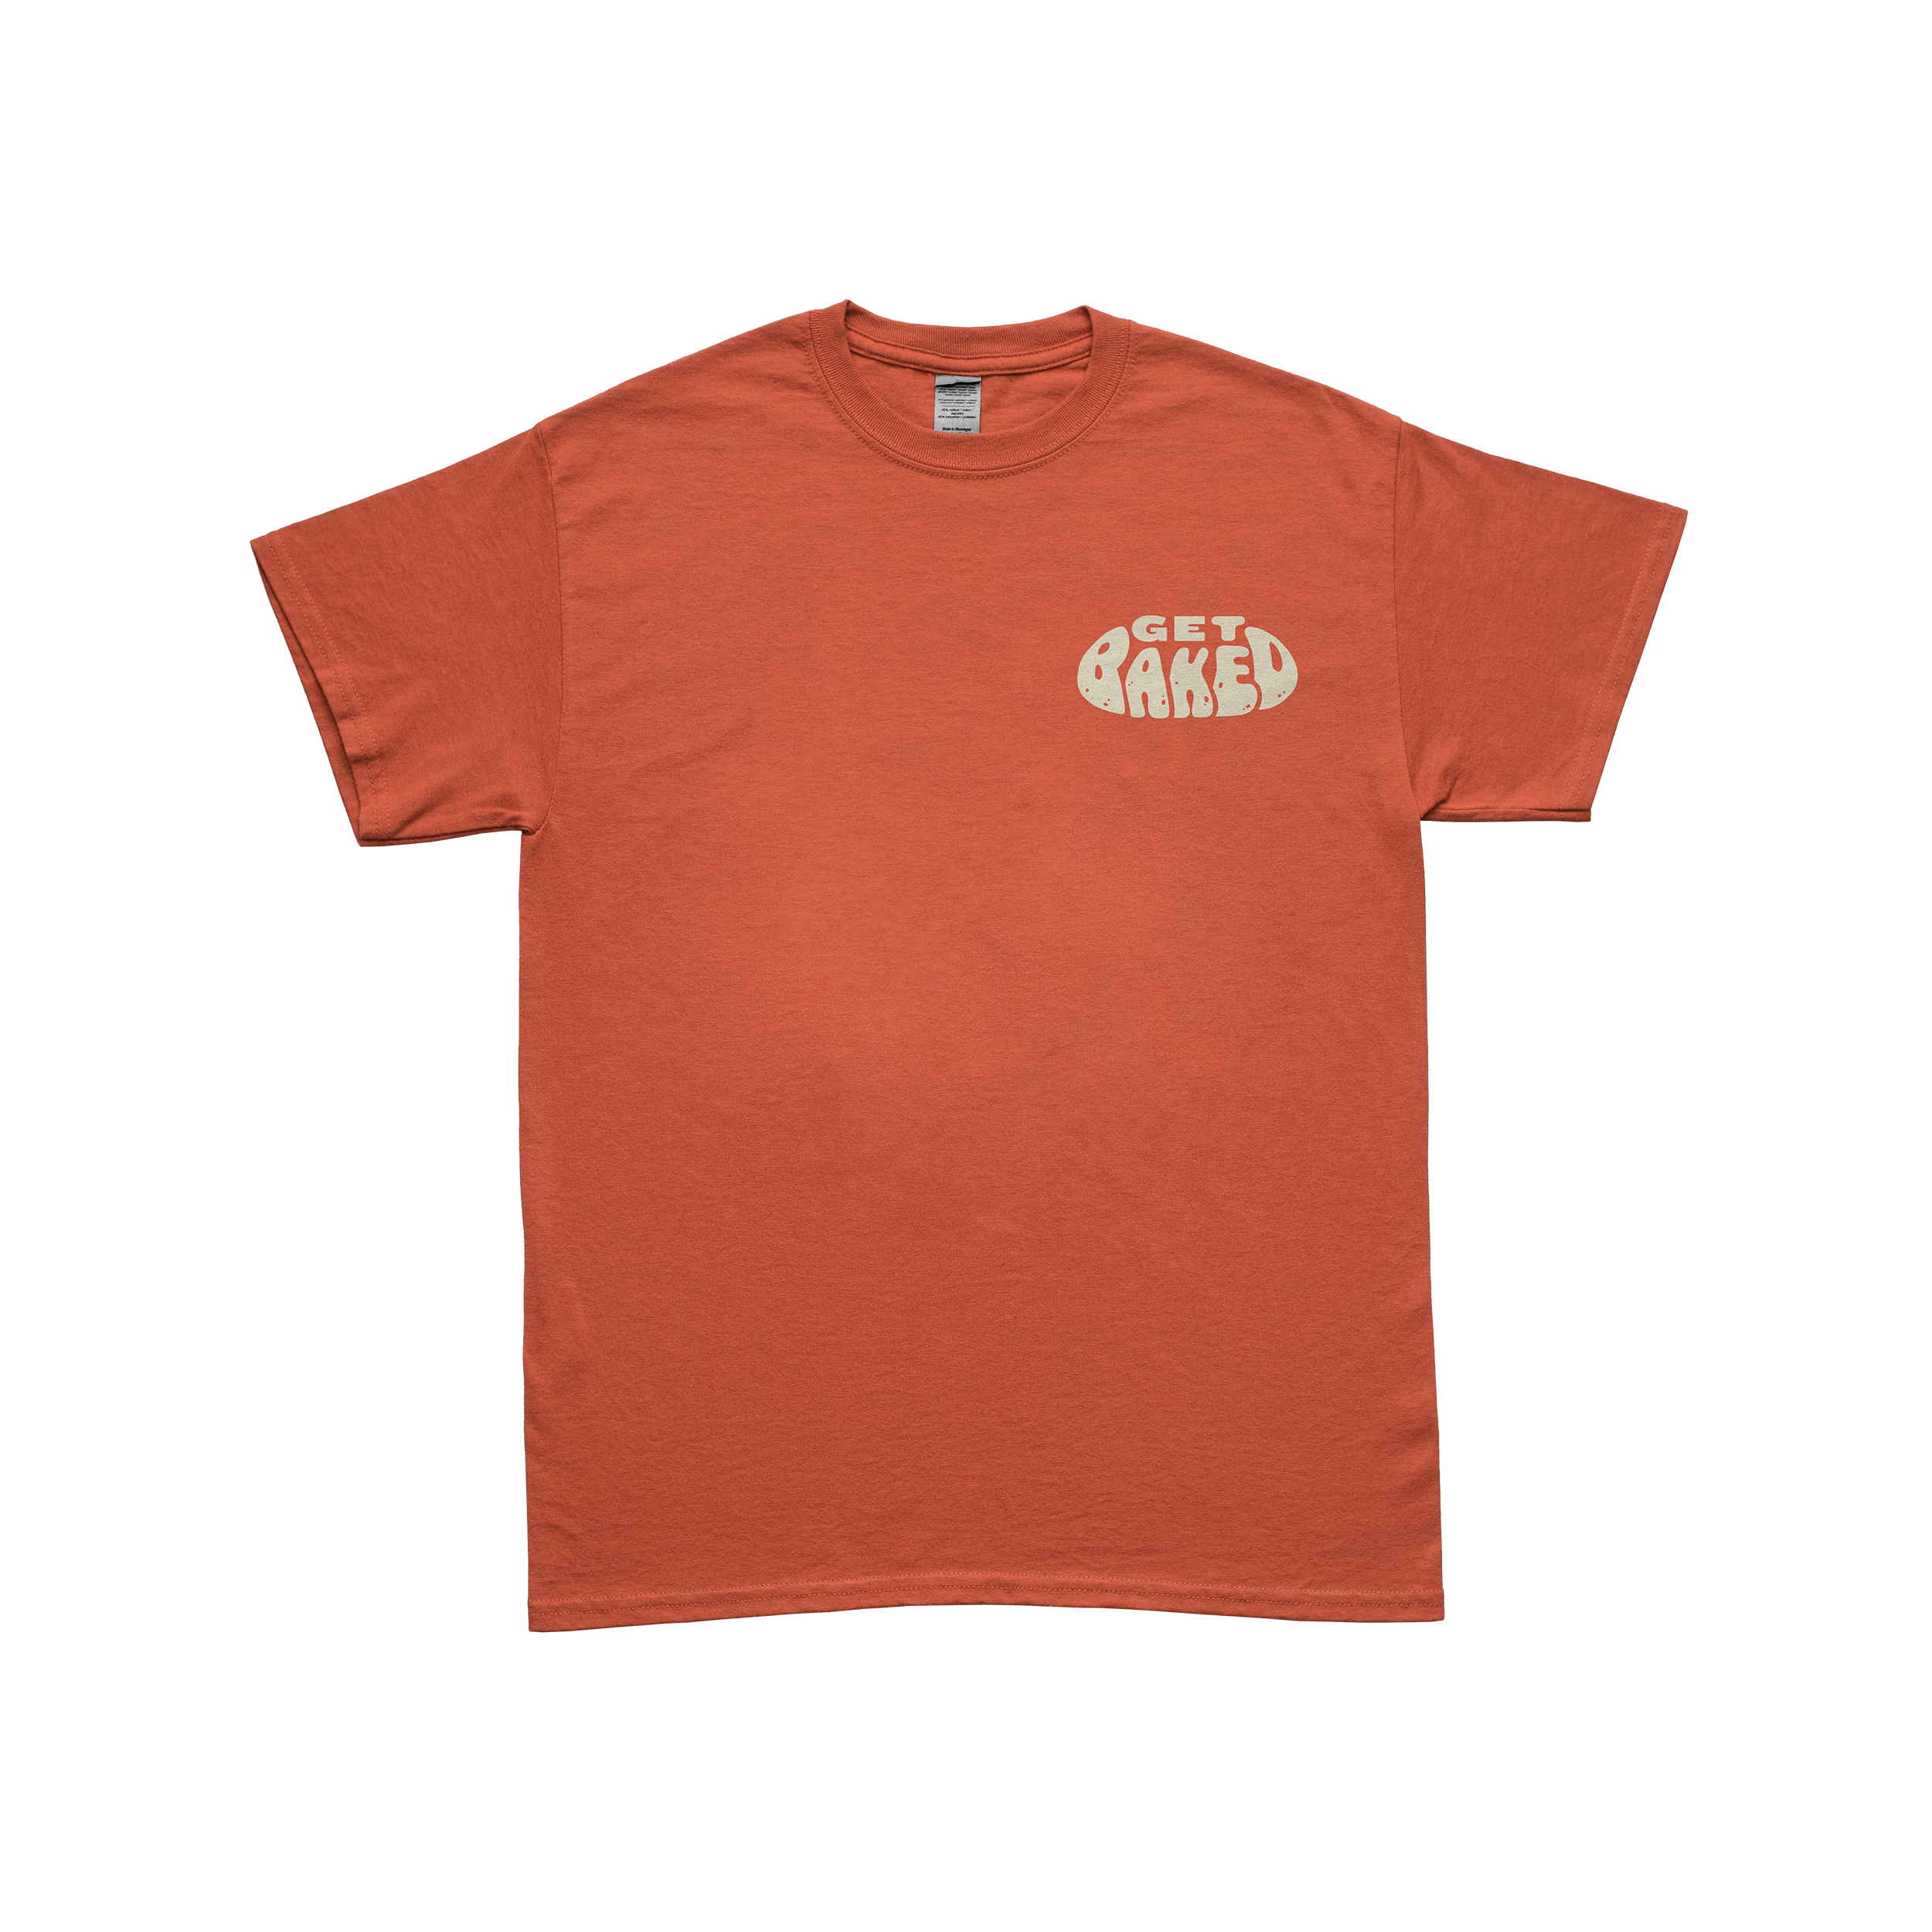 GBKD-Tee-1-Front.png